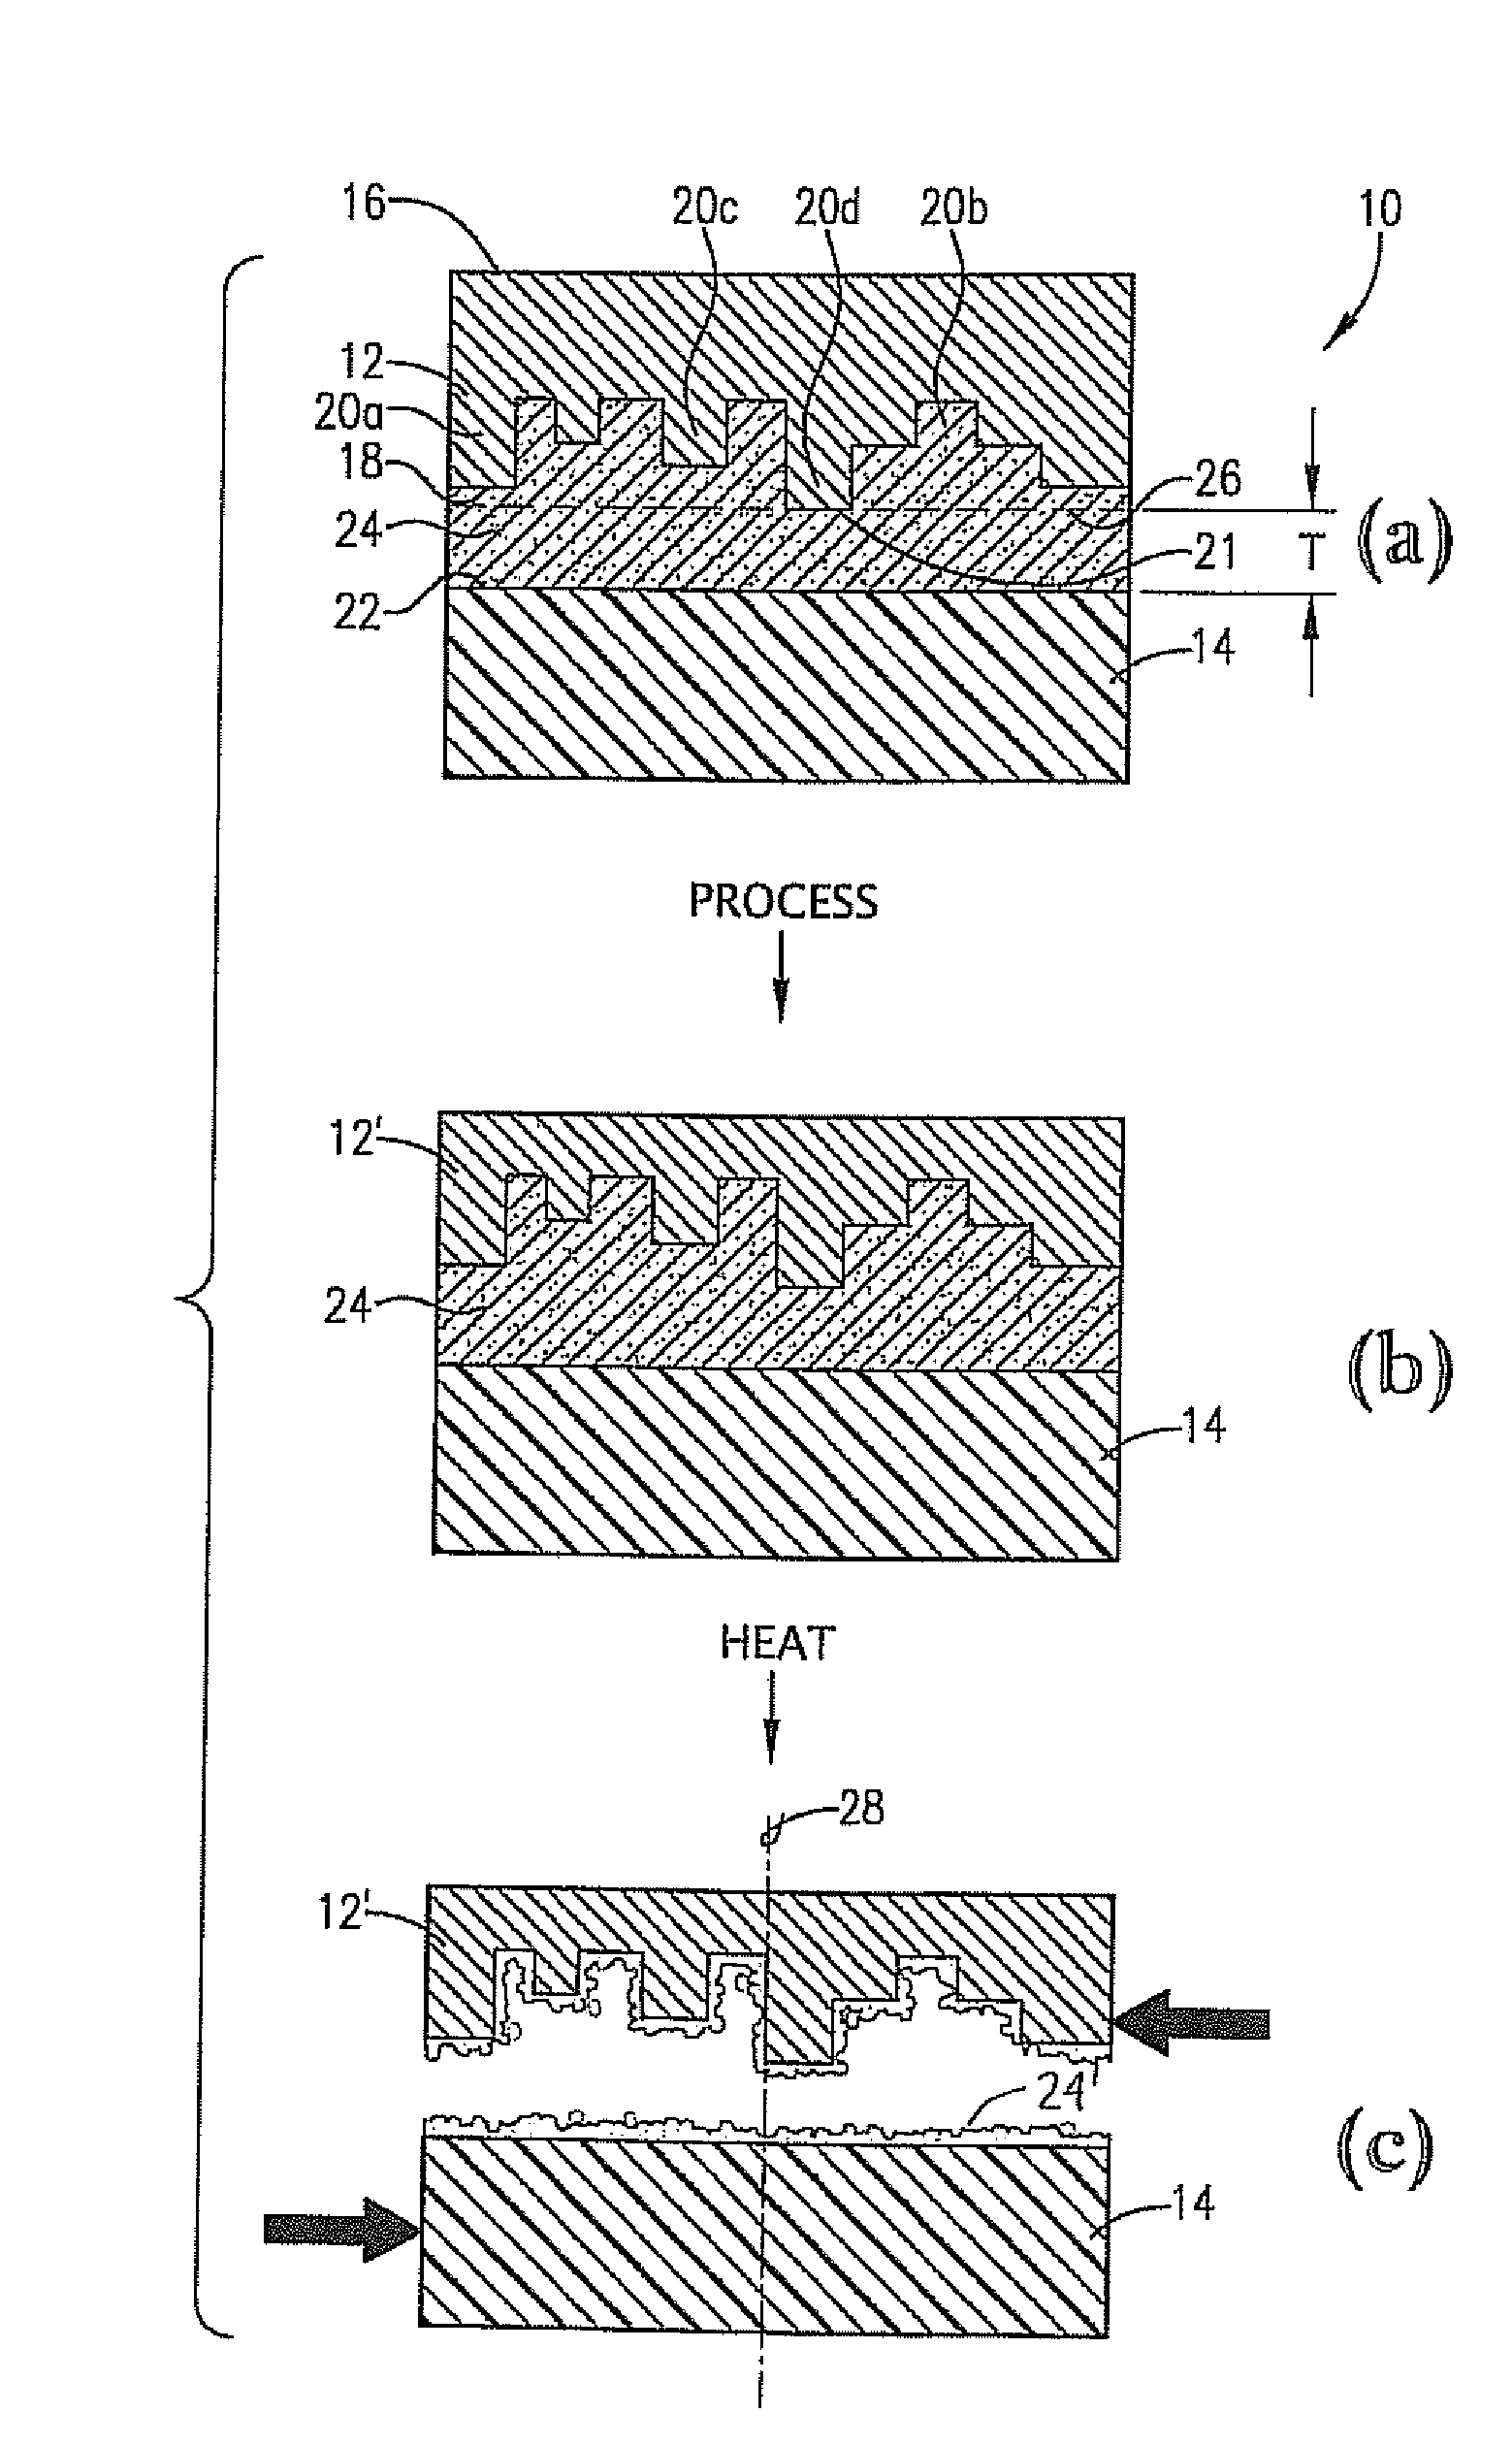 High-temperature, spin-on, bonding compositions for temporary wafer bonding using sliding approach